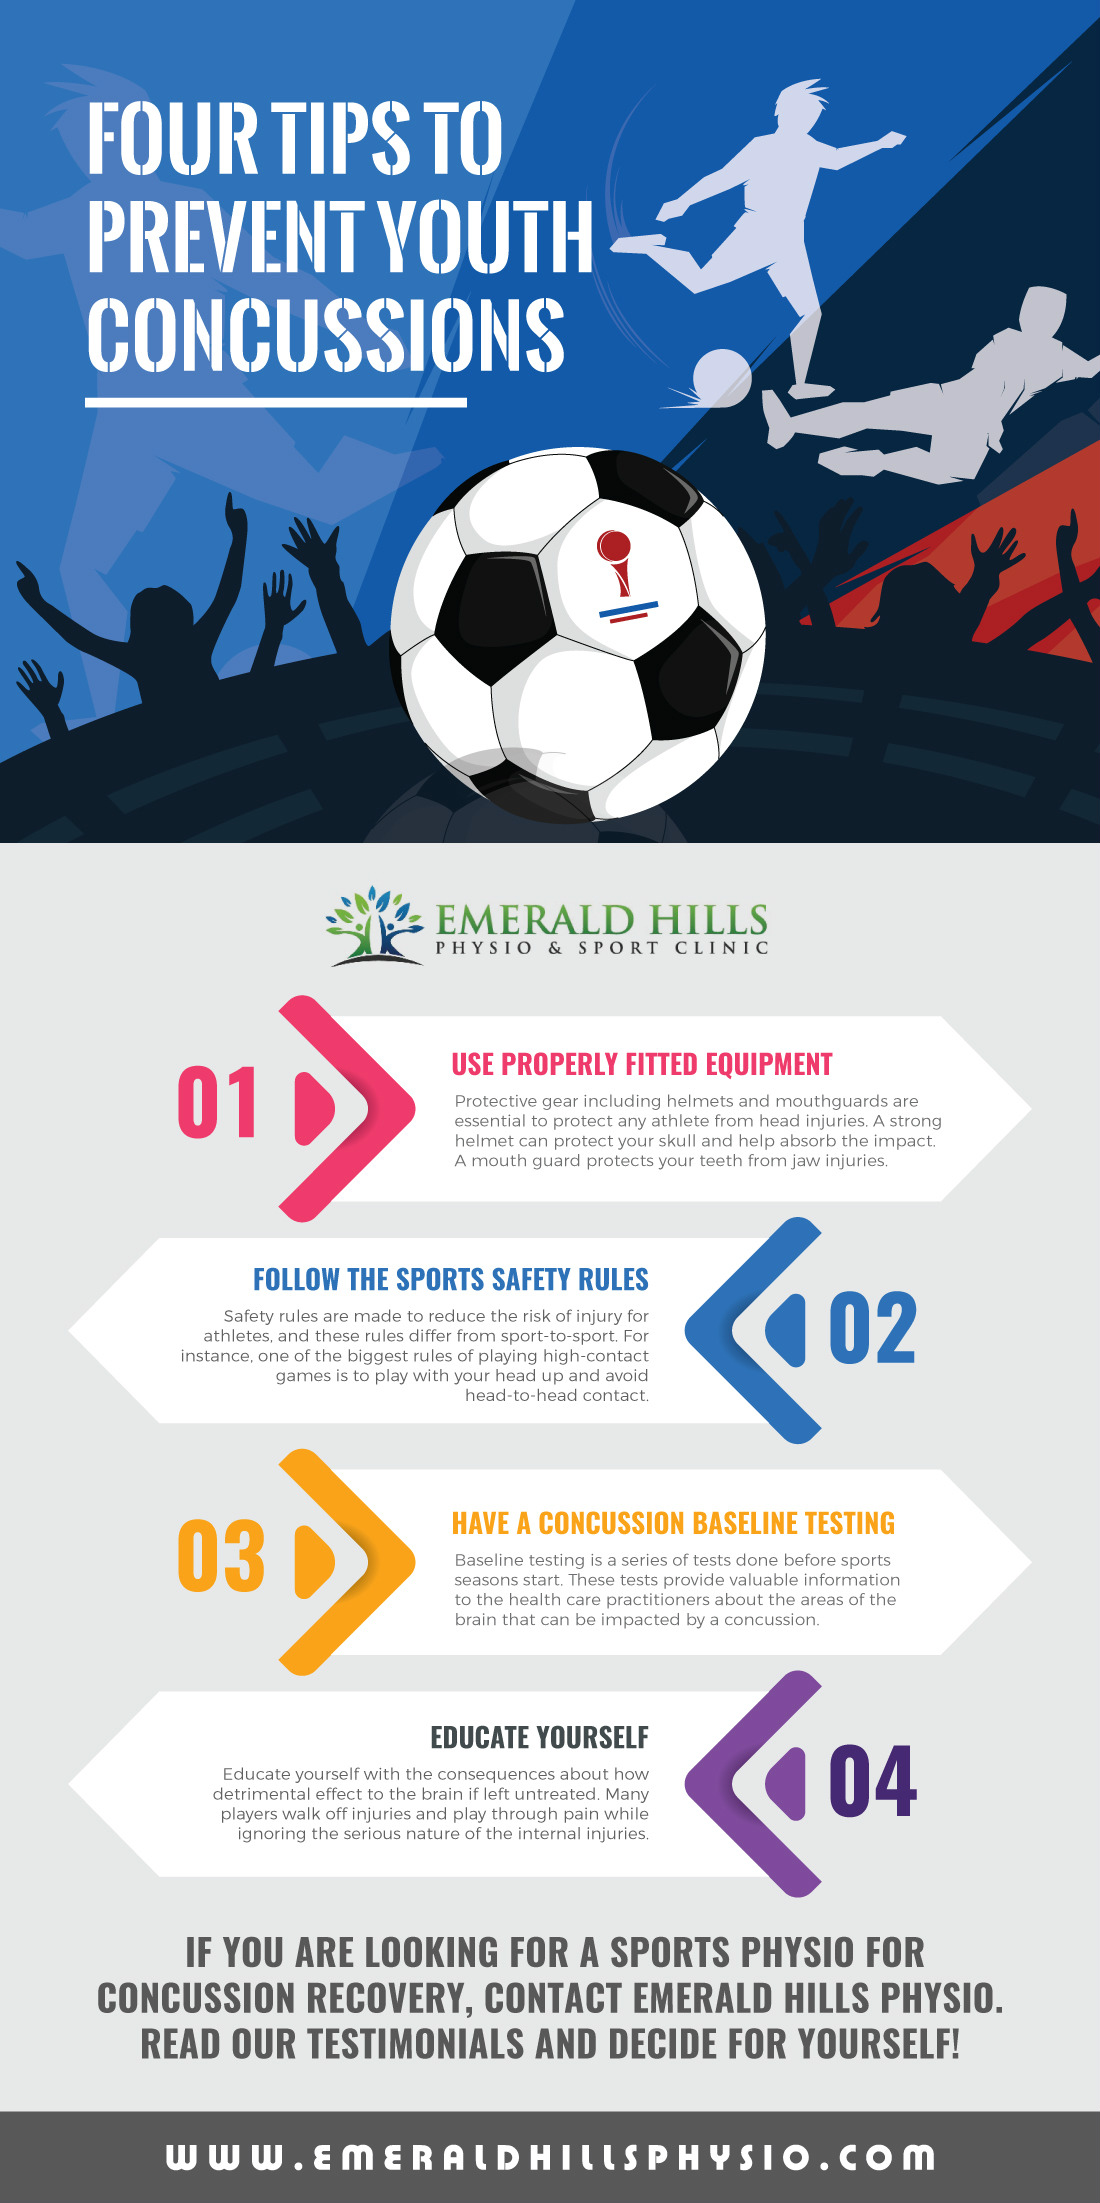 Tips to Prevent Youth Concussions